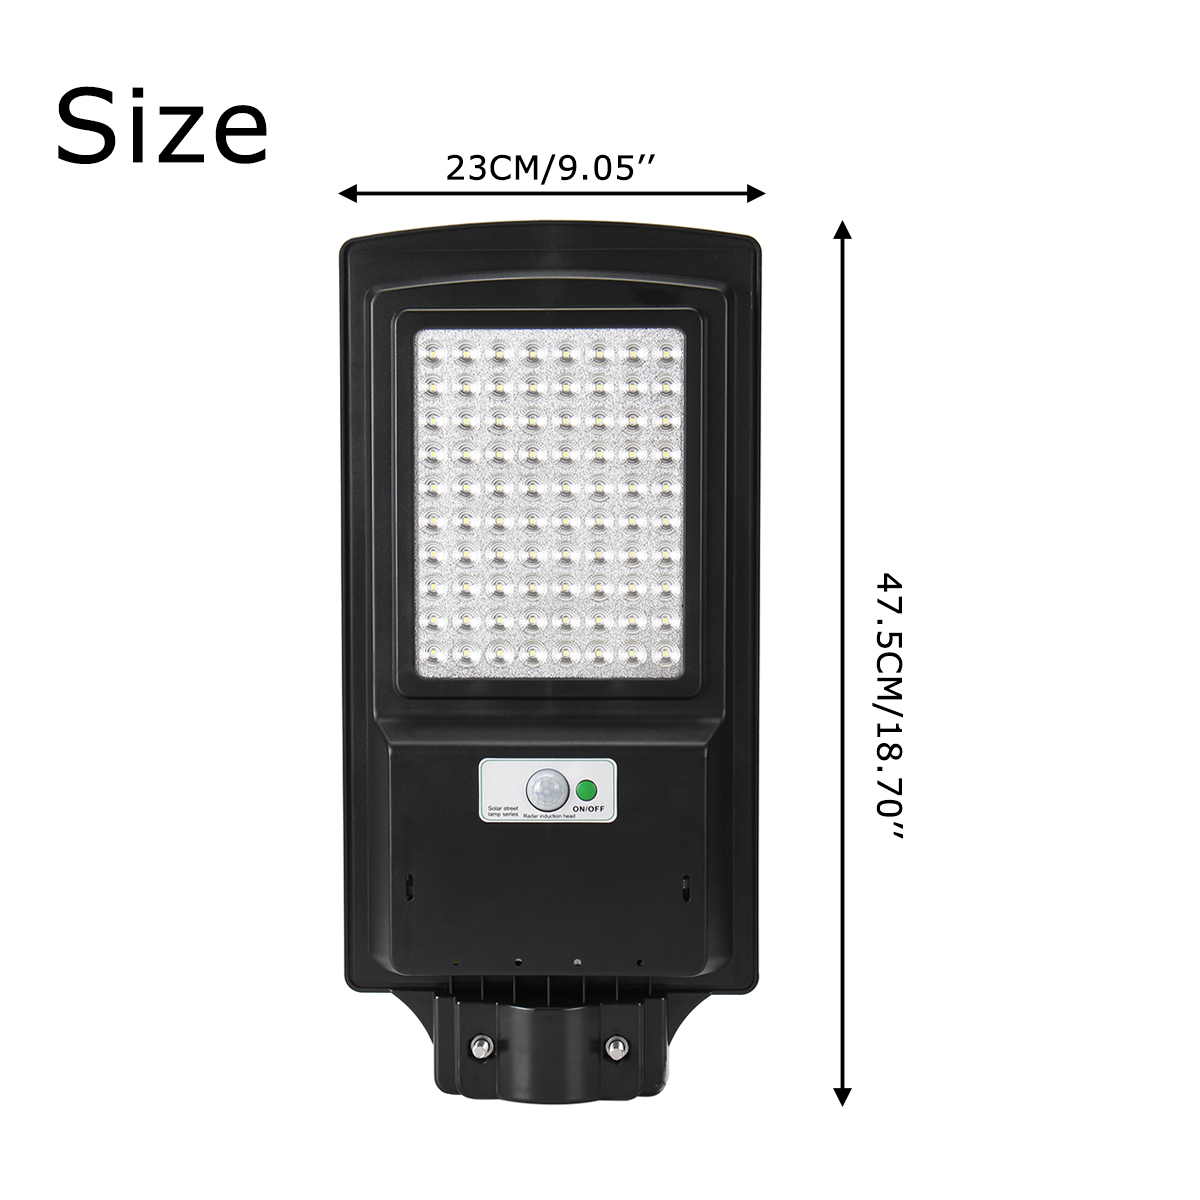 2347CM-Waterproof-80-LED-Solar-Street-Light-120-Degree-With-Remote-Control-1622330-5